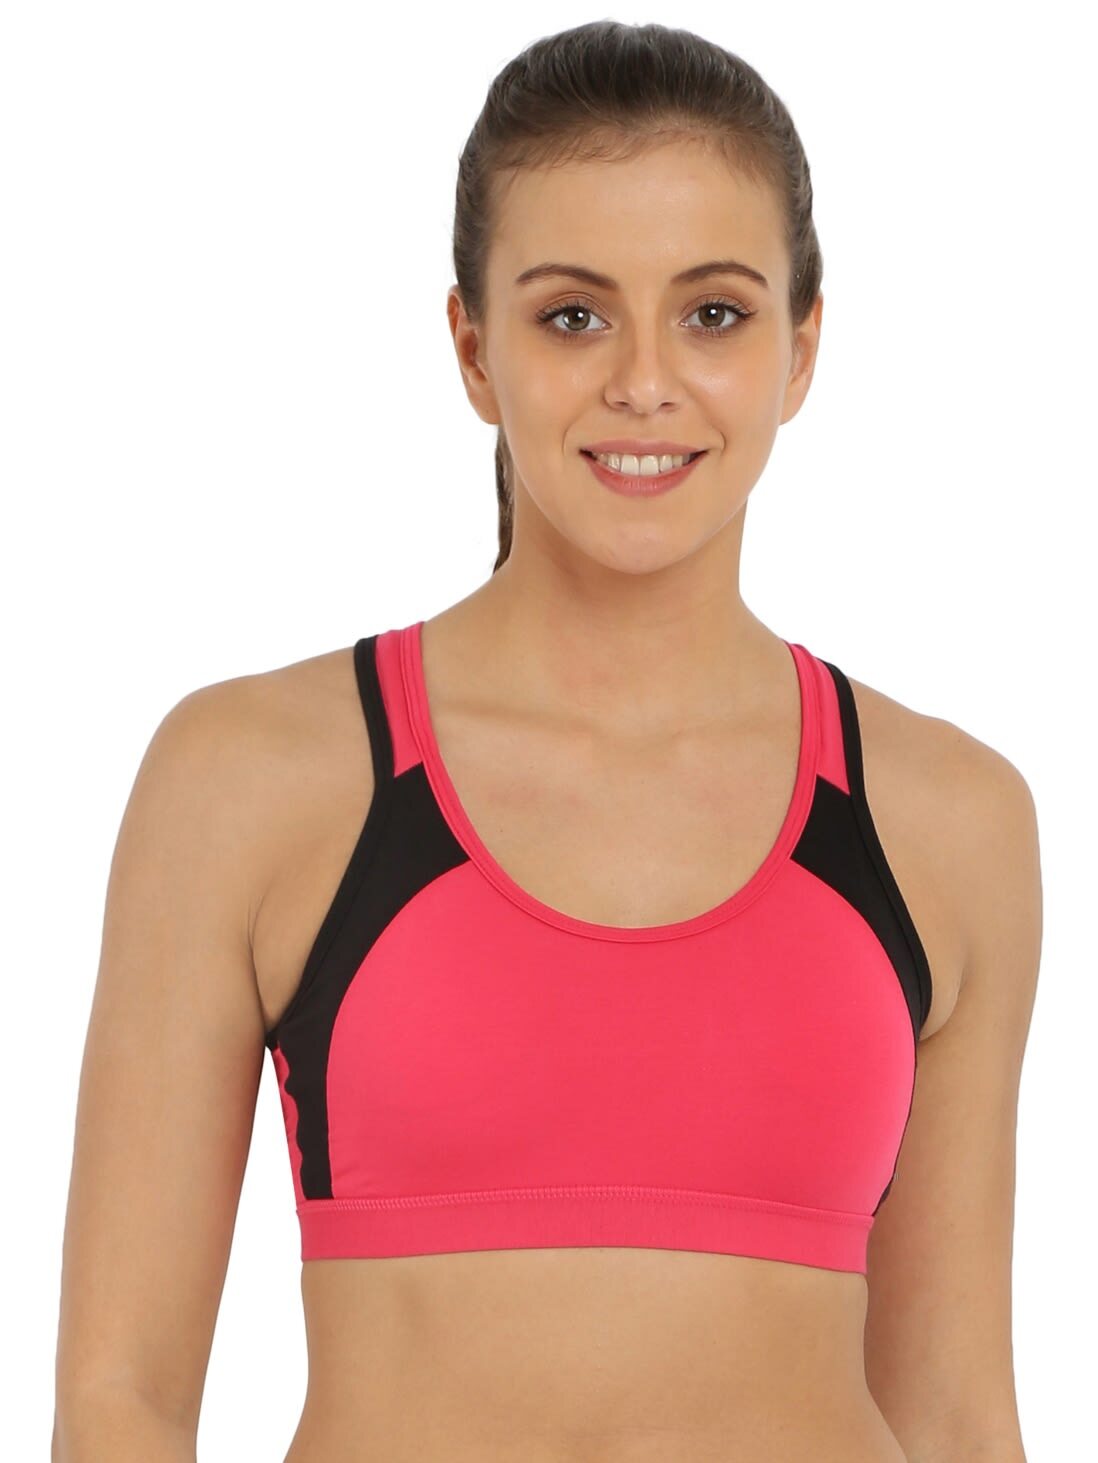 Buy JOCKEY Natural Non-Wired Fixed Straps Non Padded Women's Every